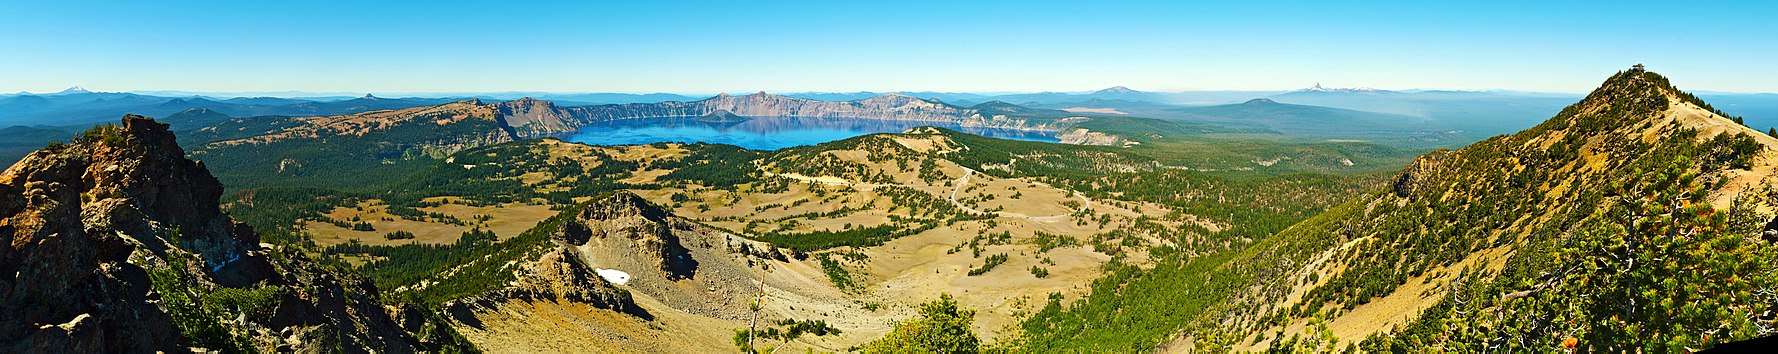 A panorama shot displays Crater Lake in the center background, with mountains in the foreground on the left and right